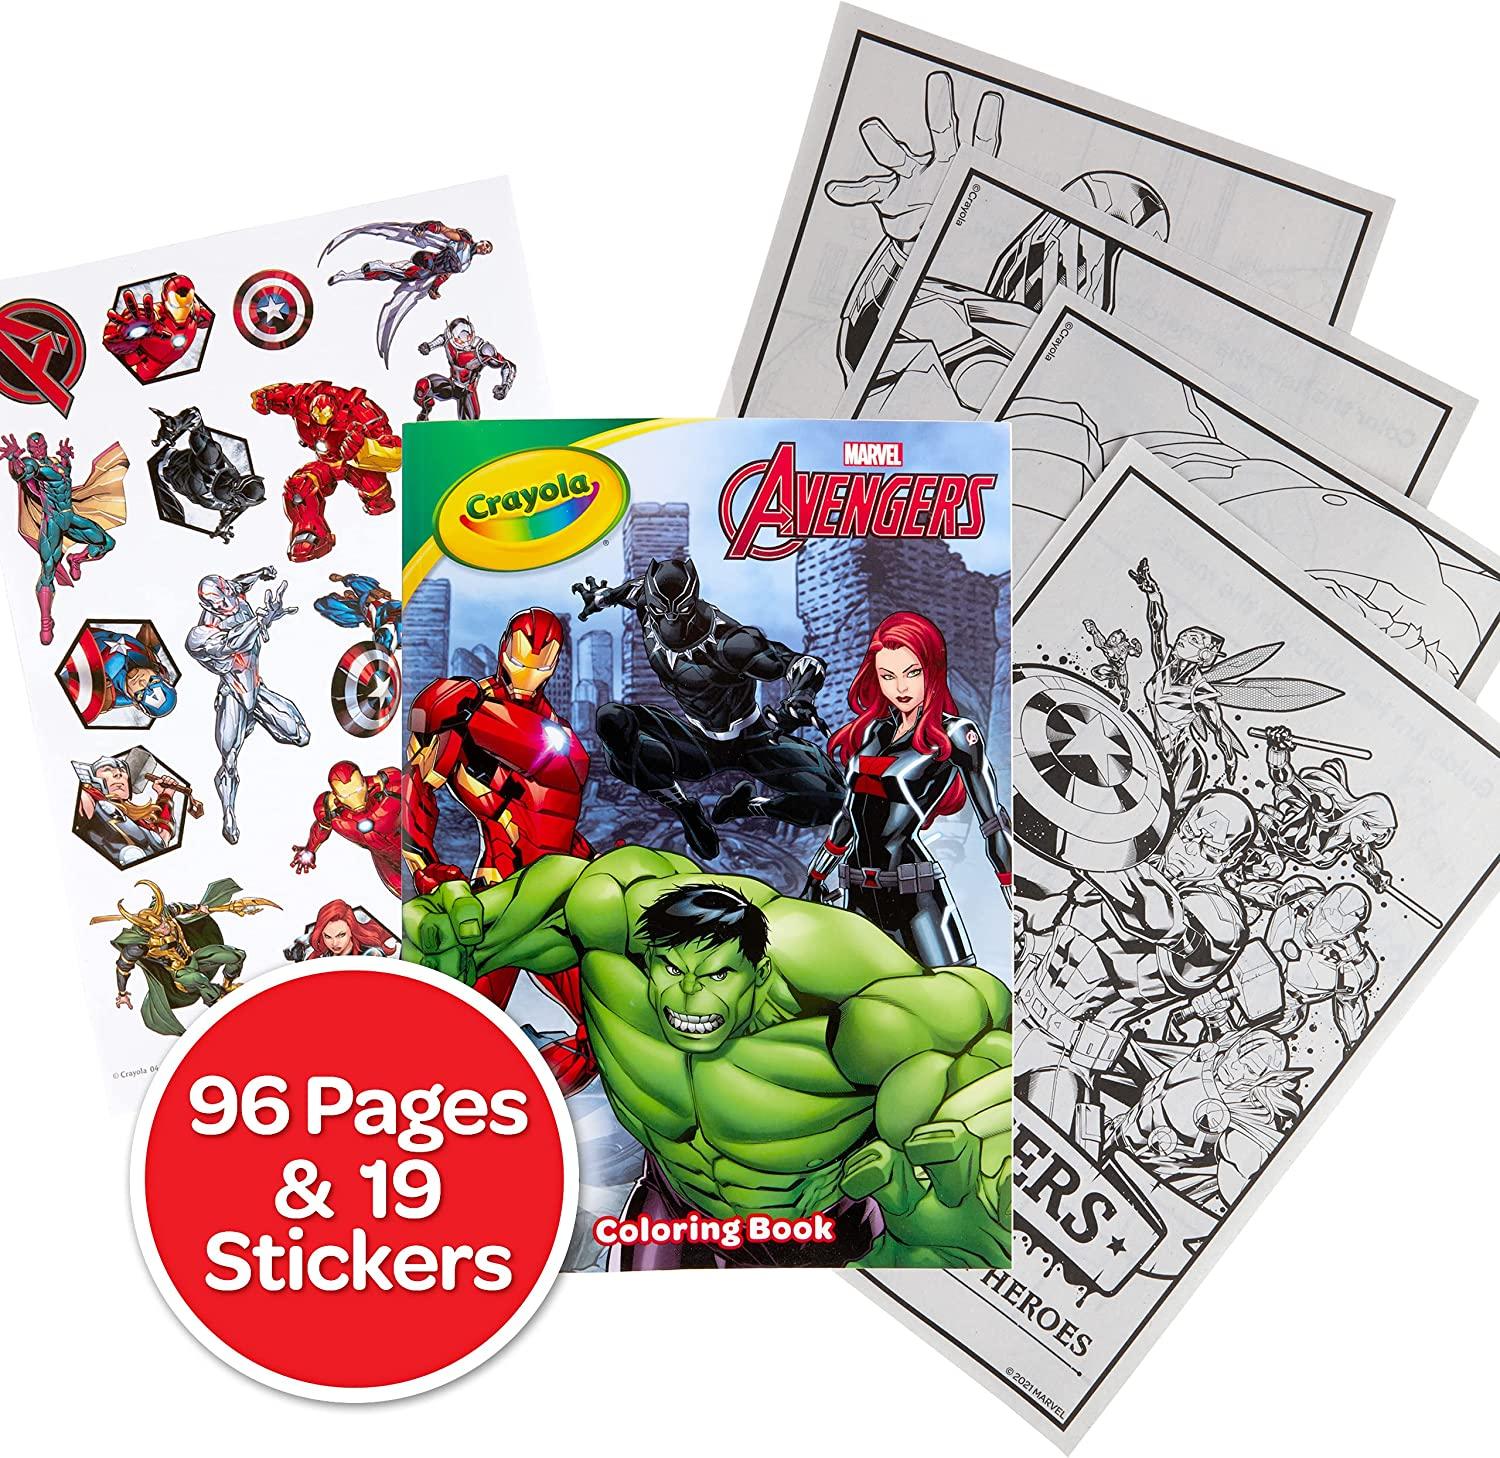 Crayola Avengers Coloring Book with Stickers for $1.39